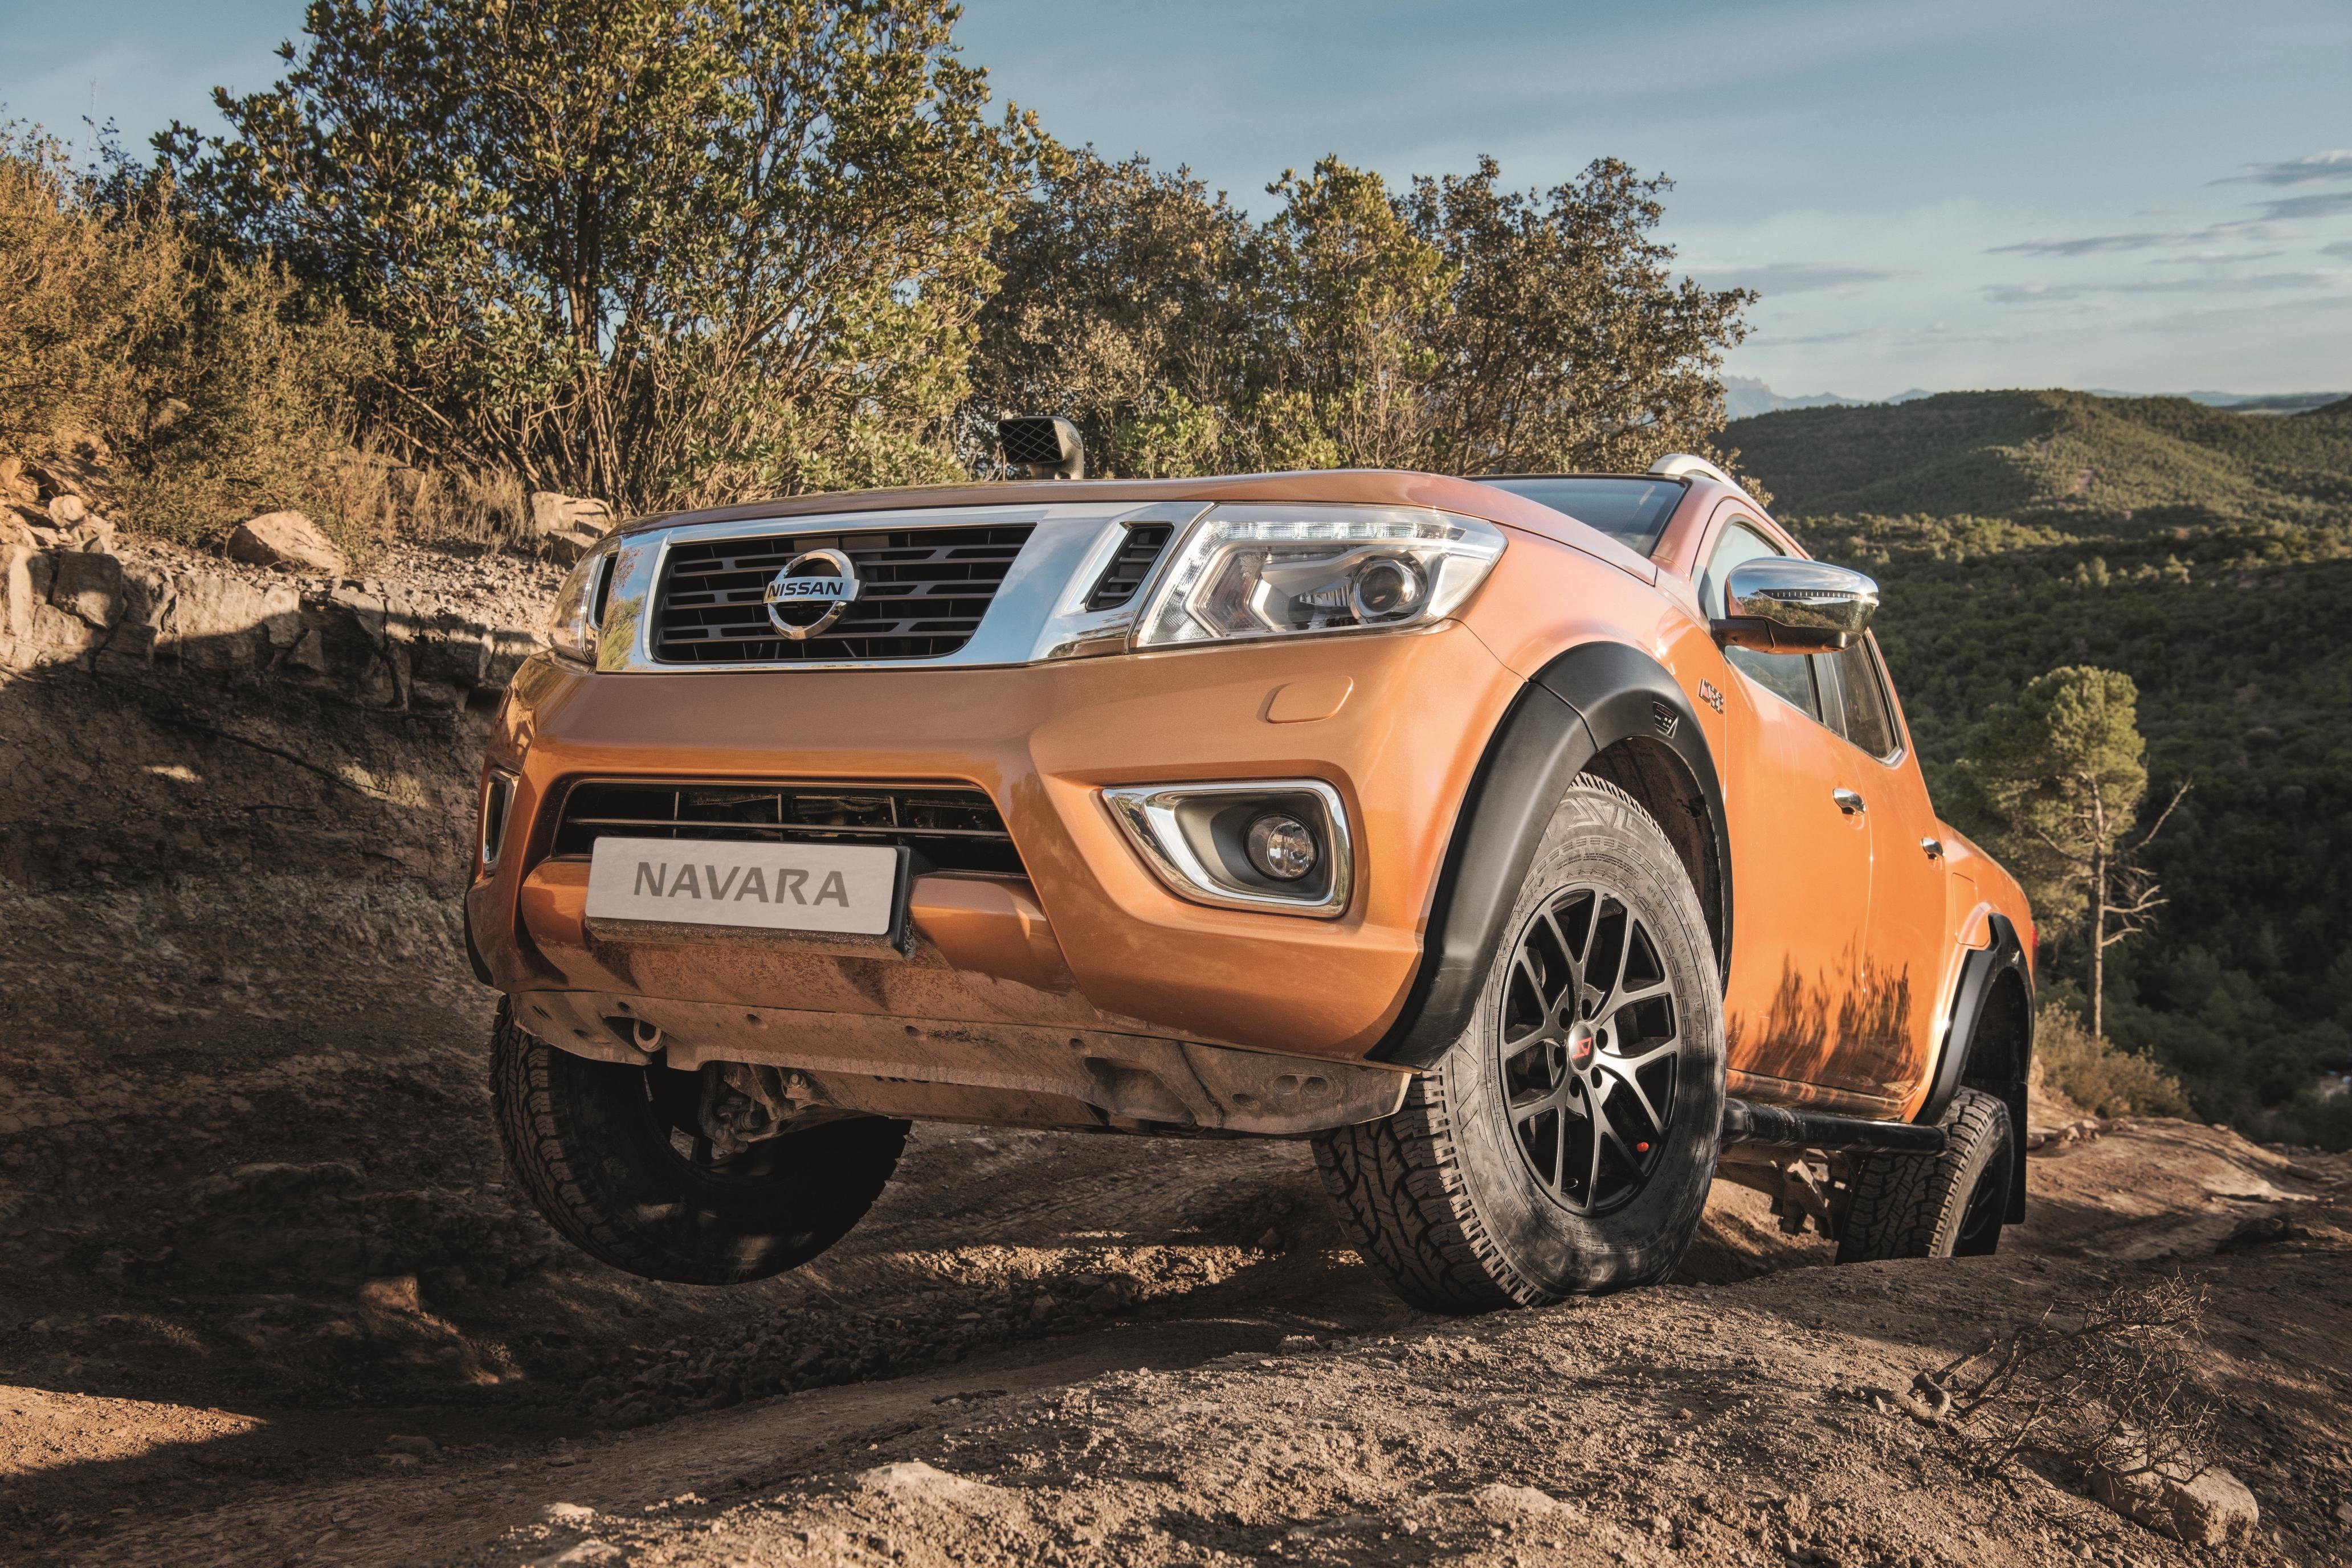 The Navara is at its most aggressive in Arctic Trucks layout